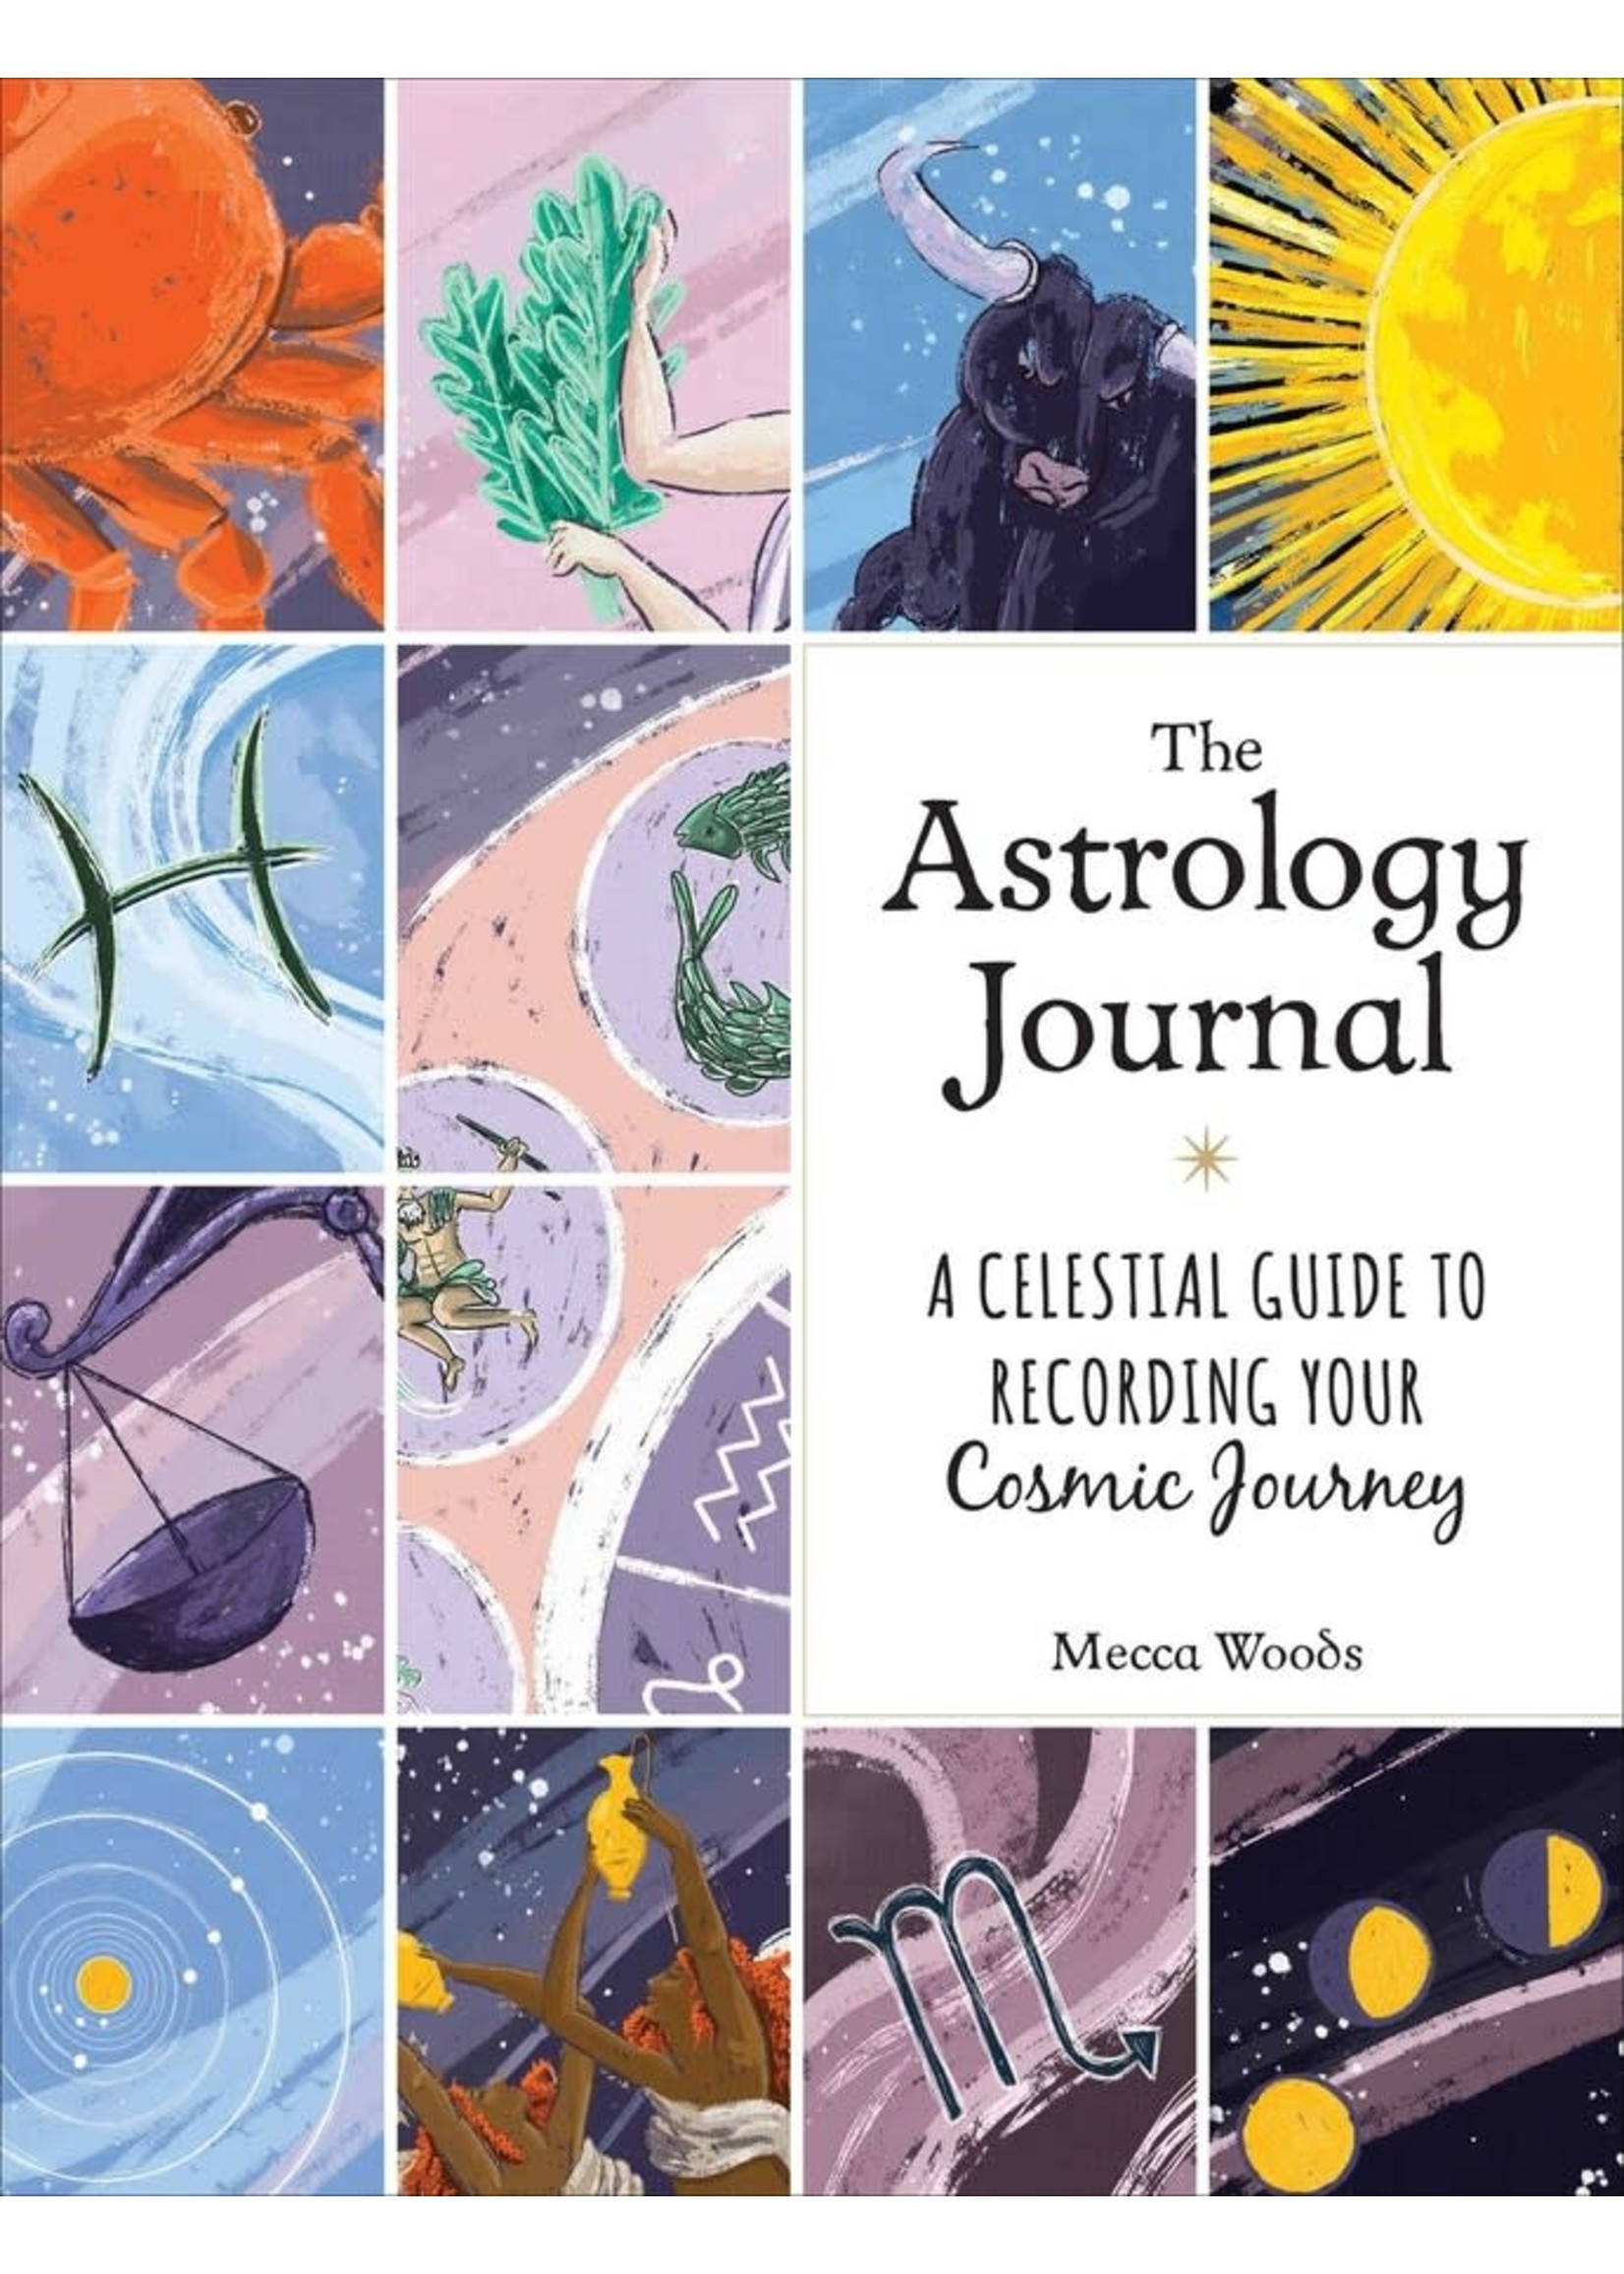 The Astrology Journal - A Celestial Guide to Recording Your Cosmic Journey